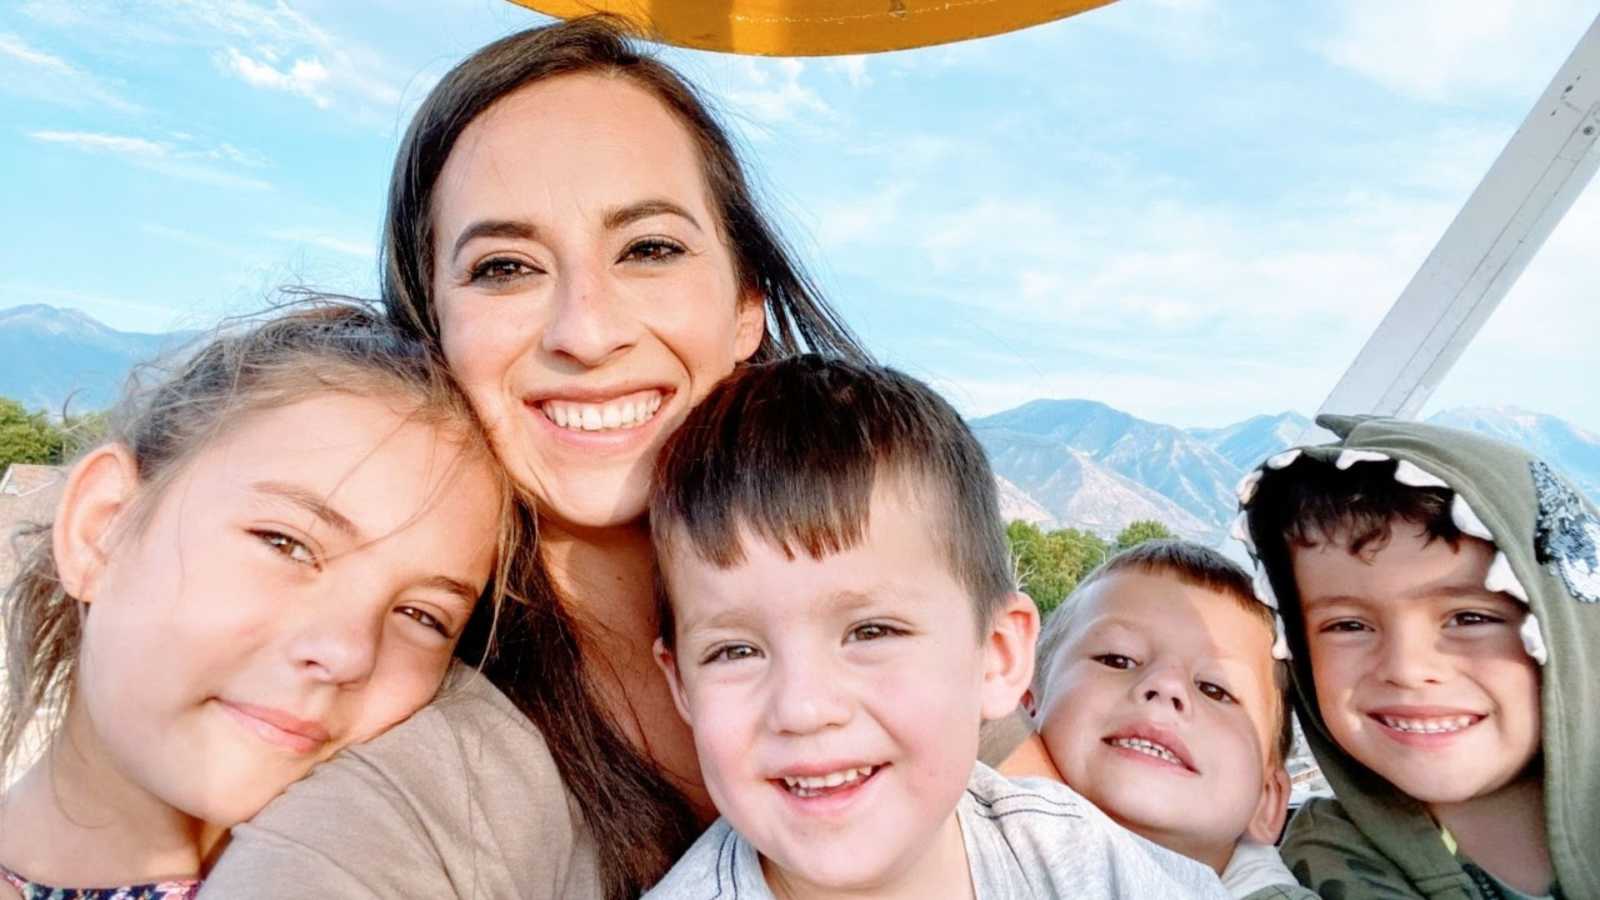 Widowed mom of 4 takes a selfie with her children with mountainous scenery behind them